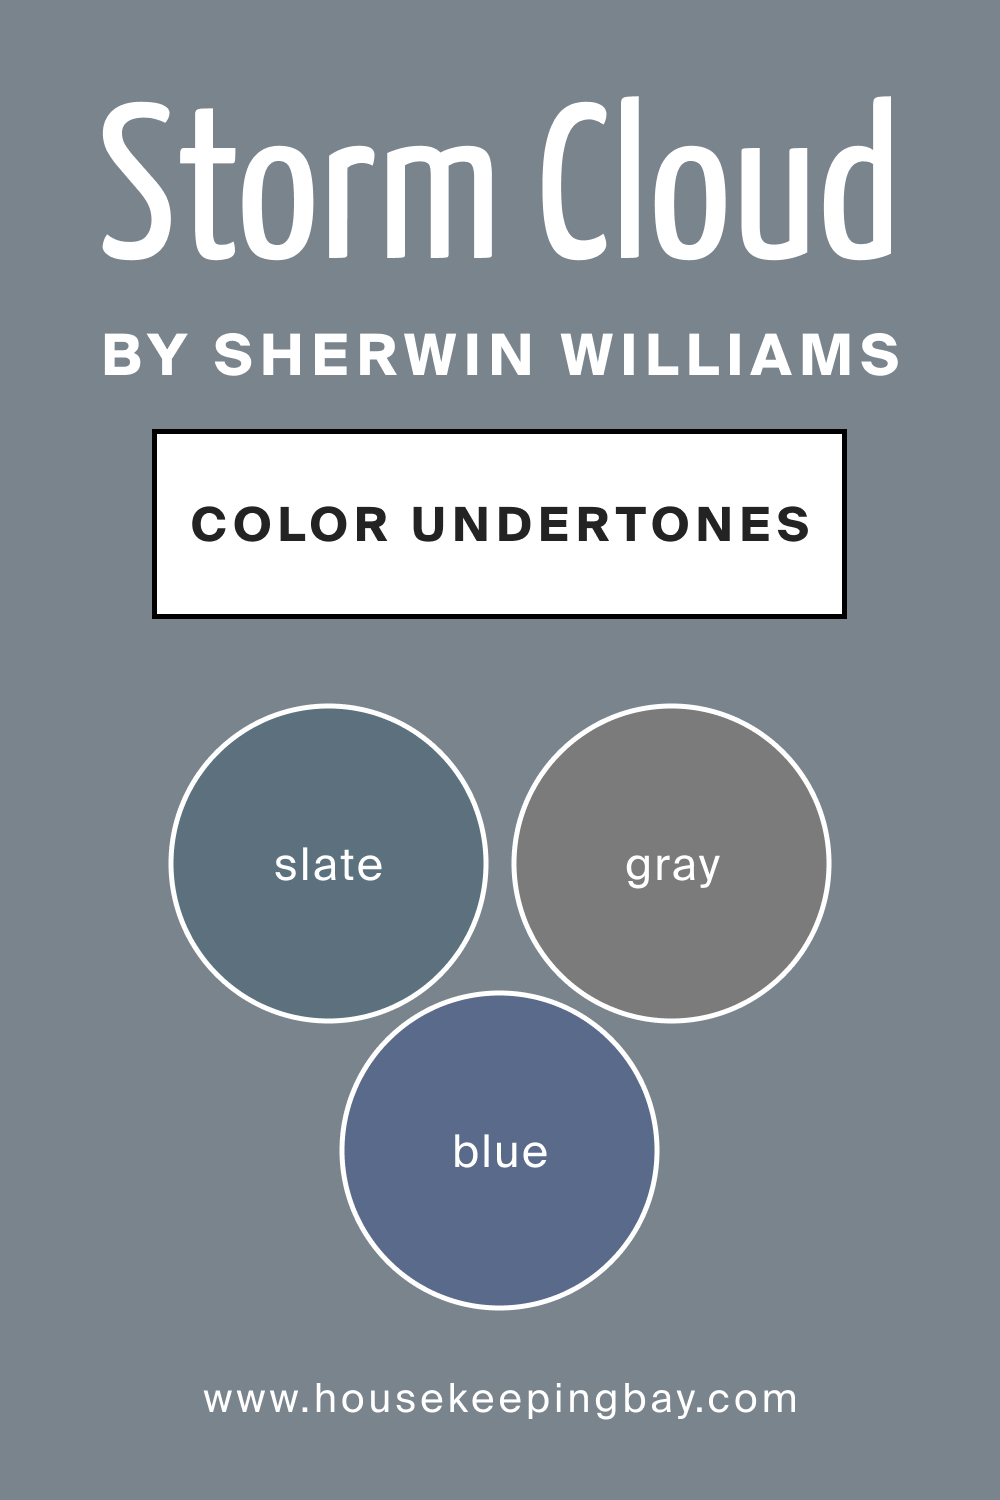 SW 6249 Storm Cloud by Sherwin Williams Color Undertone